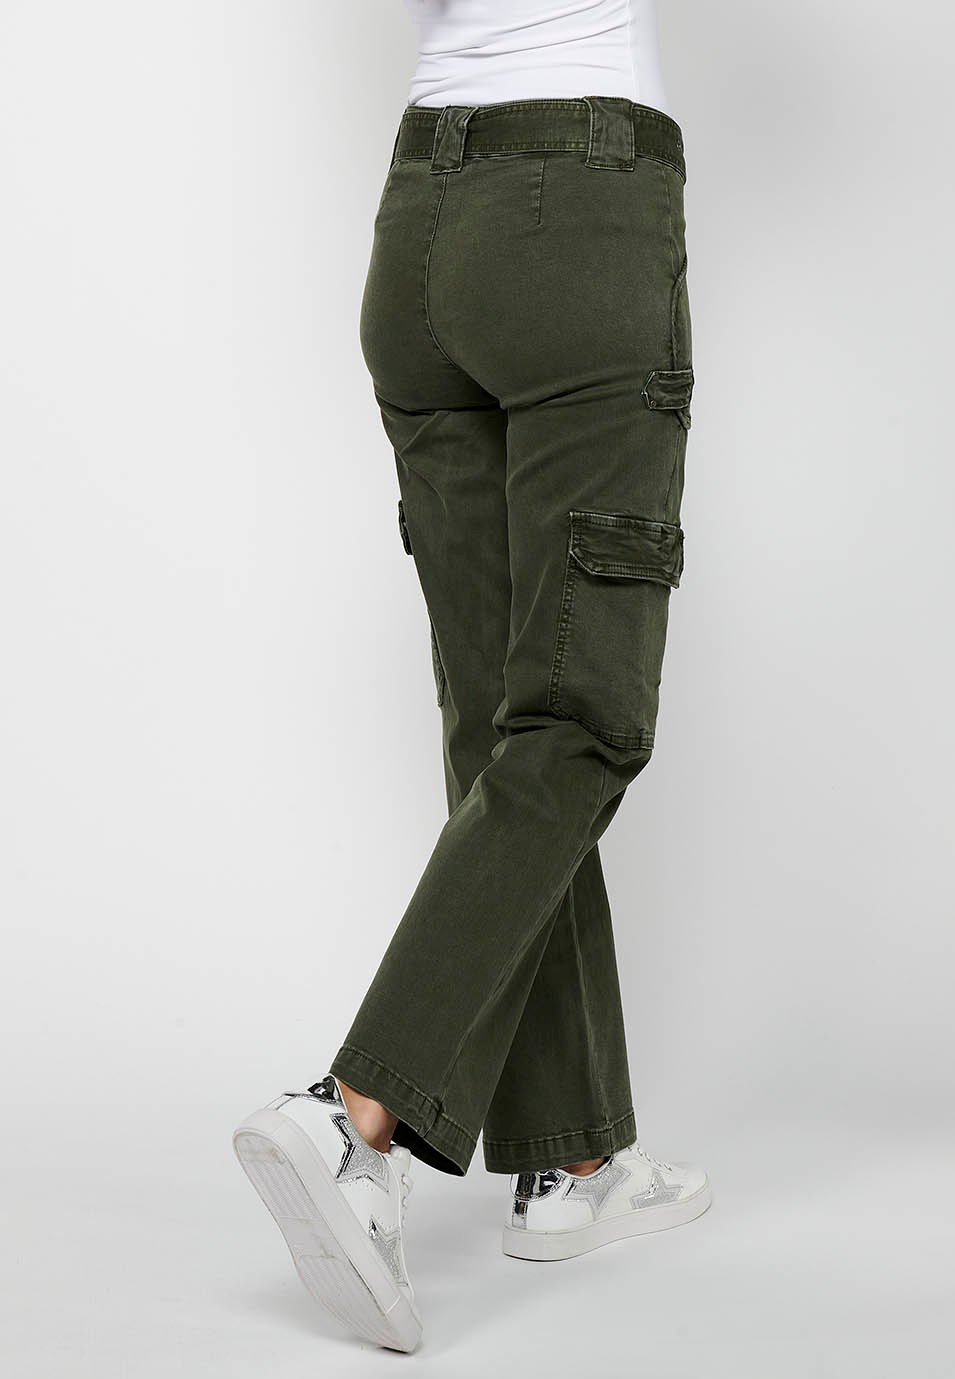 Long straight-cut pants with front zipper closure and button with patch pockets in Khaki Color for Women 8